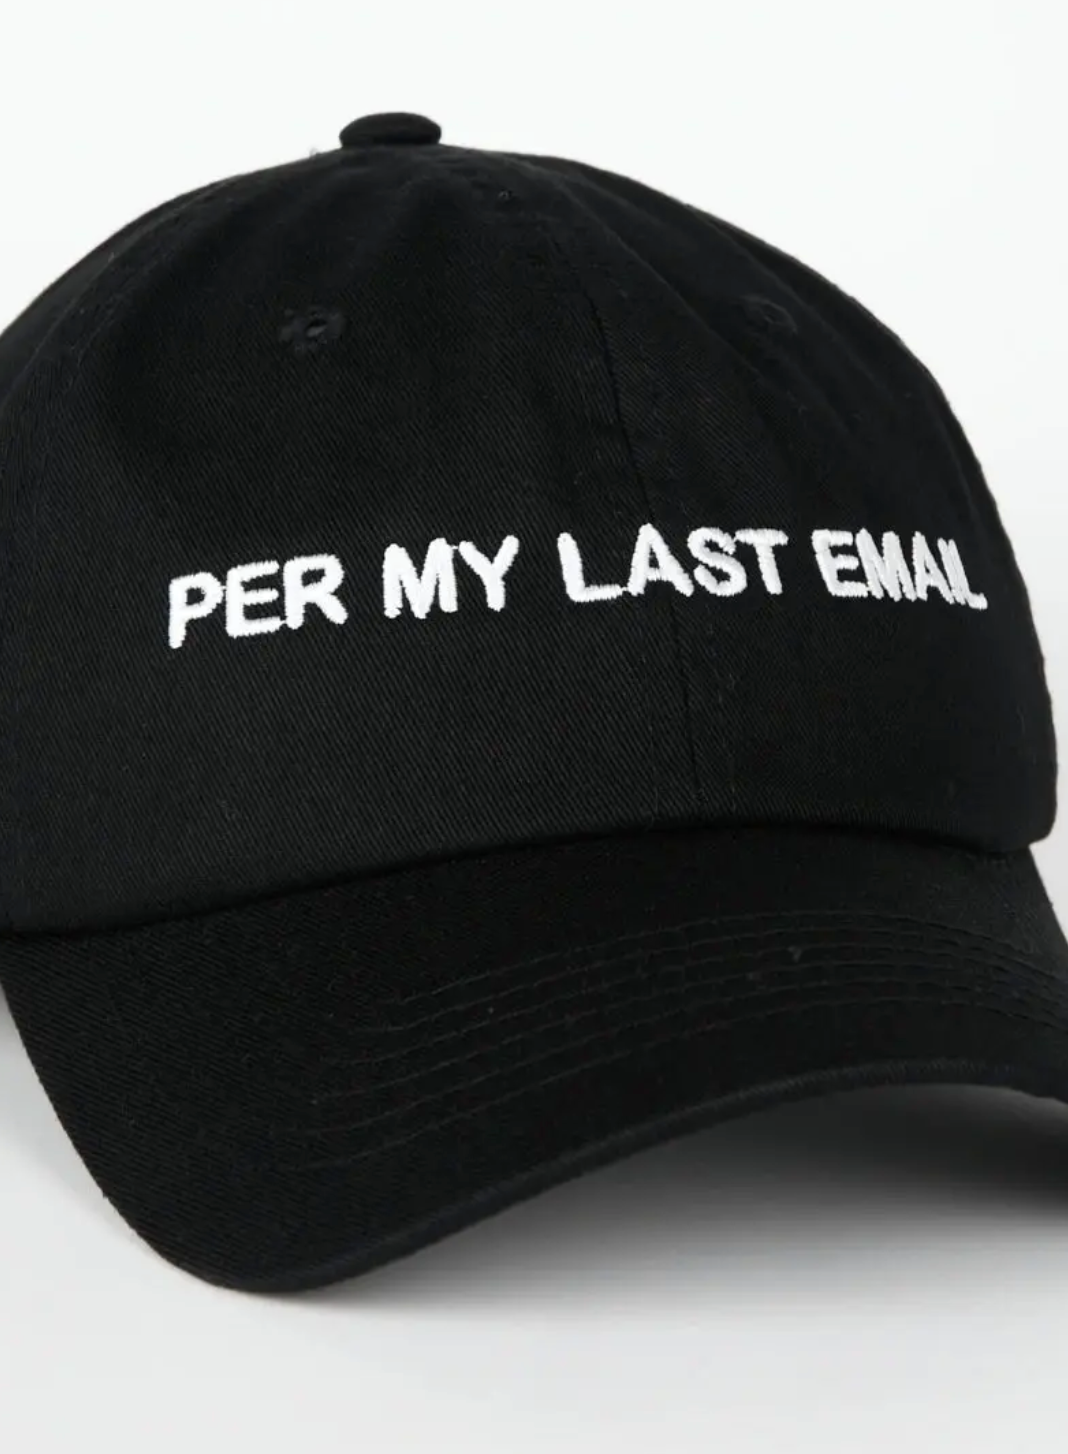 "Per My Last Email" Cap by Intentionally Blank